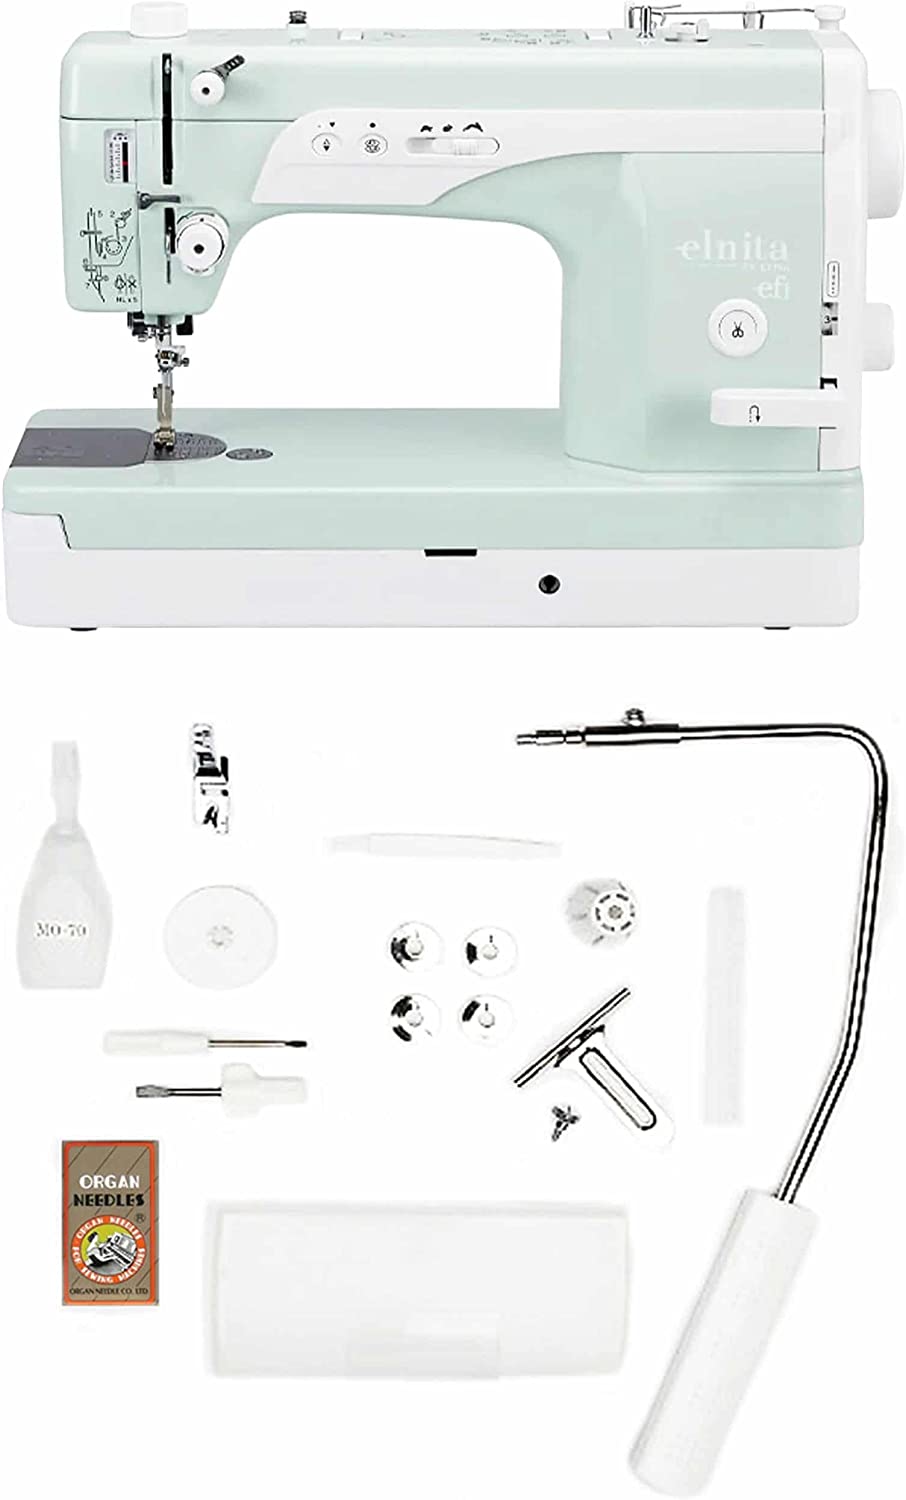 image of the Elna Elnita EF1 Sewing and Quilting Machine with included accessories